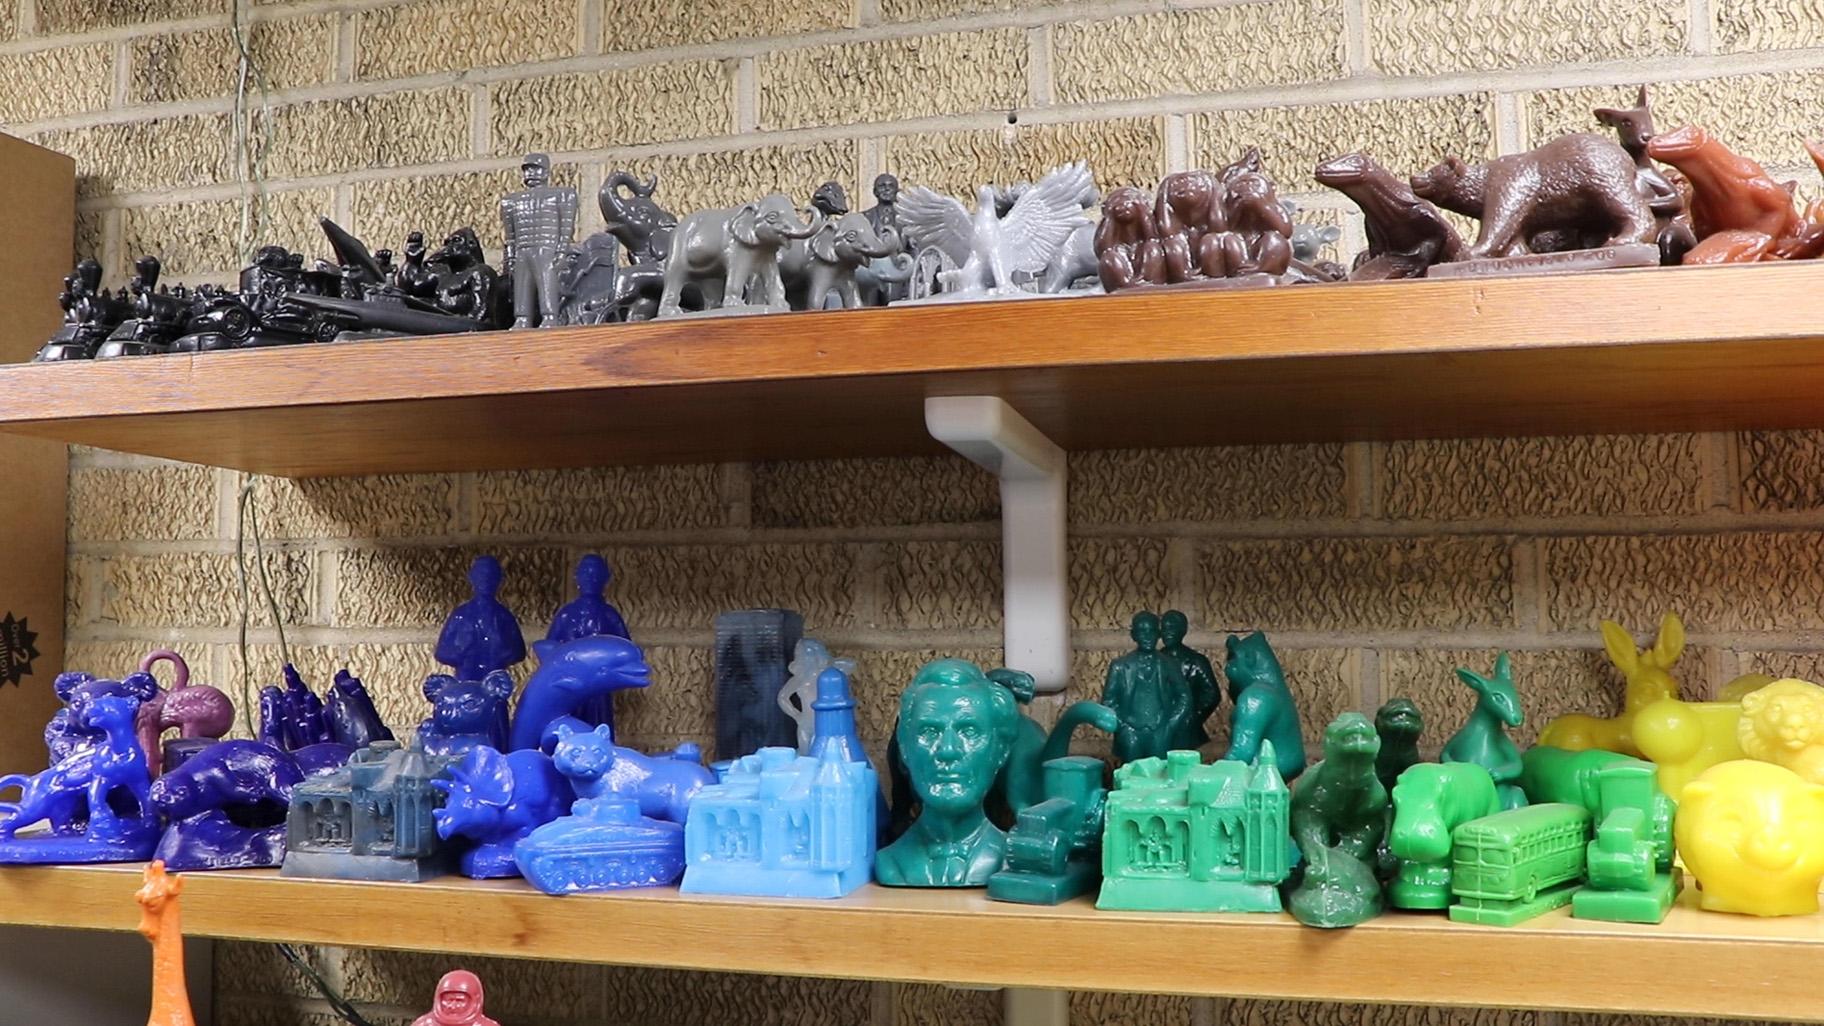 A collection of past and present plastic Mold-A-Rama models inside the mechanical shop of Mold-A-Rama Inc. in the west Chicago suburb of Lyons, Illinois. (Evan Garcia / WTTW News)